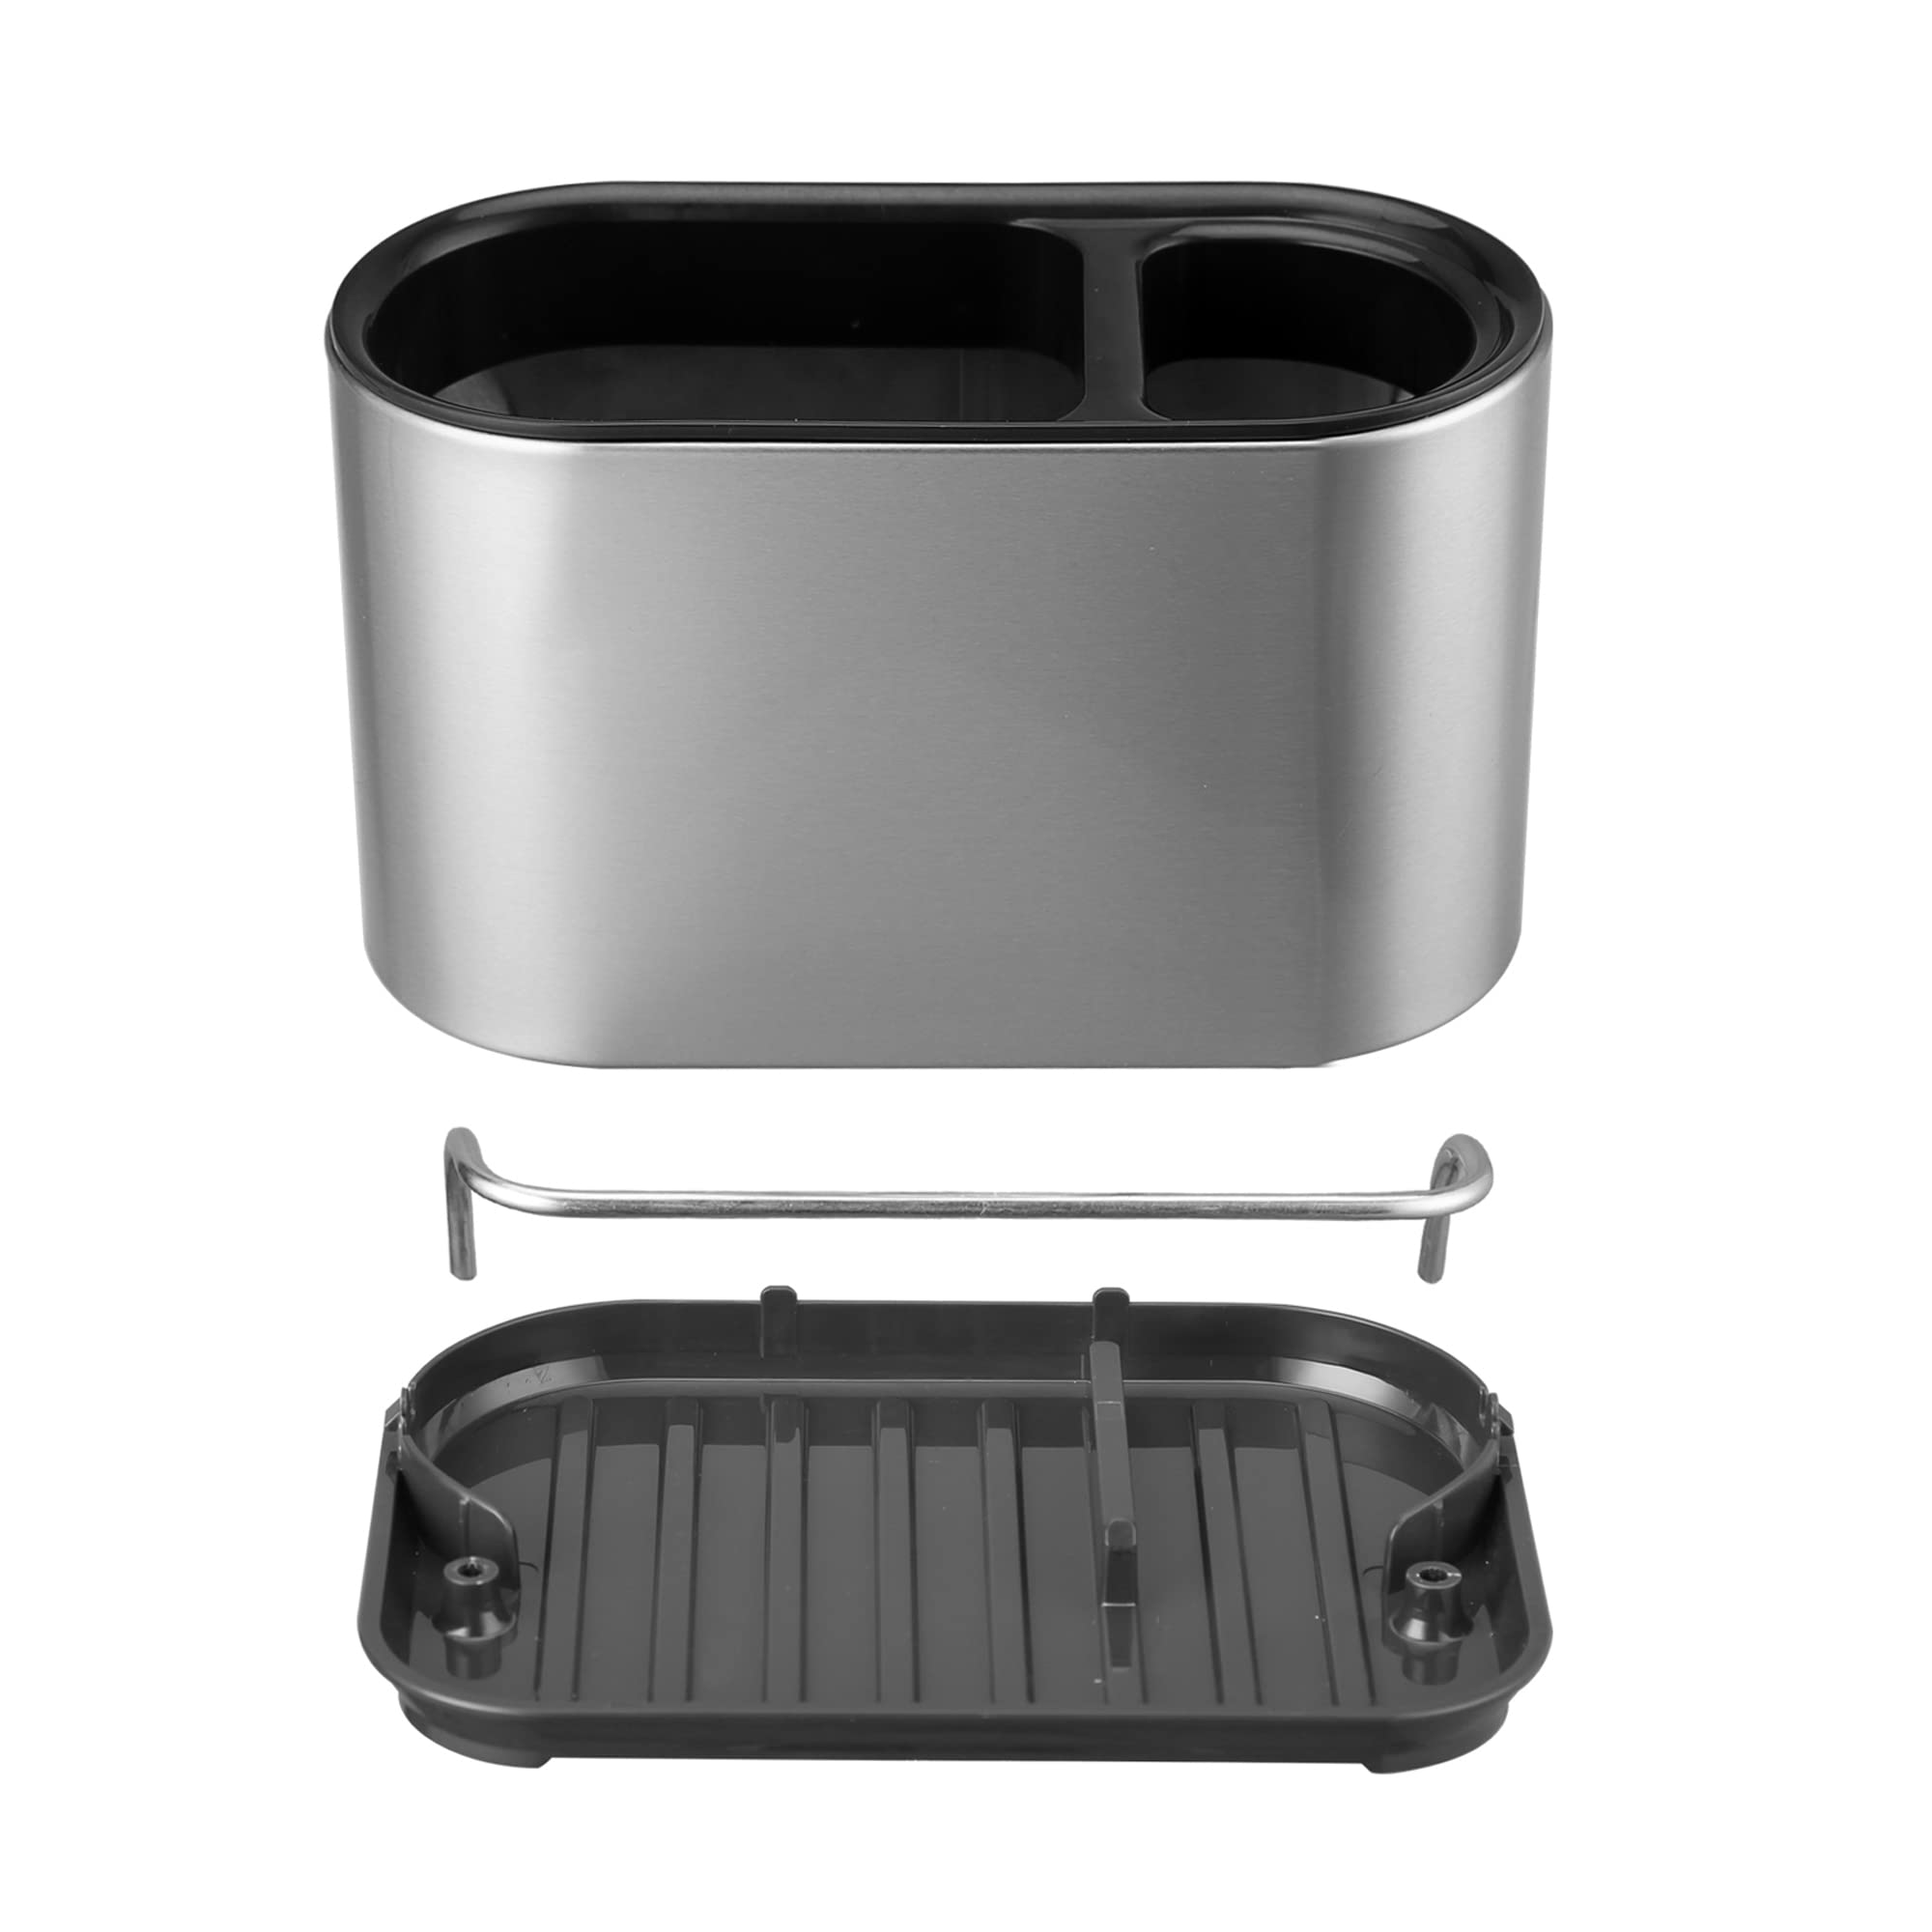 SDlumeiy Stainless Steel and Plastic Sponge Holder, Stainless Steel Sink Caddy, Sponge Holder Organizer 7.1x5.2x4.7 inches，Silver Gray